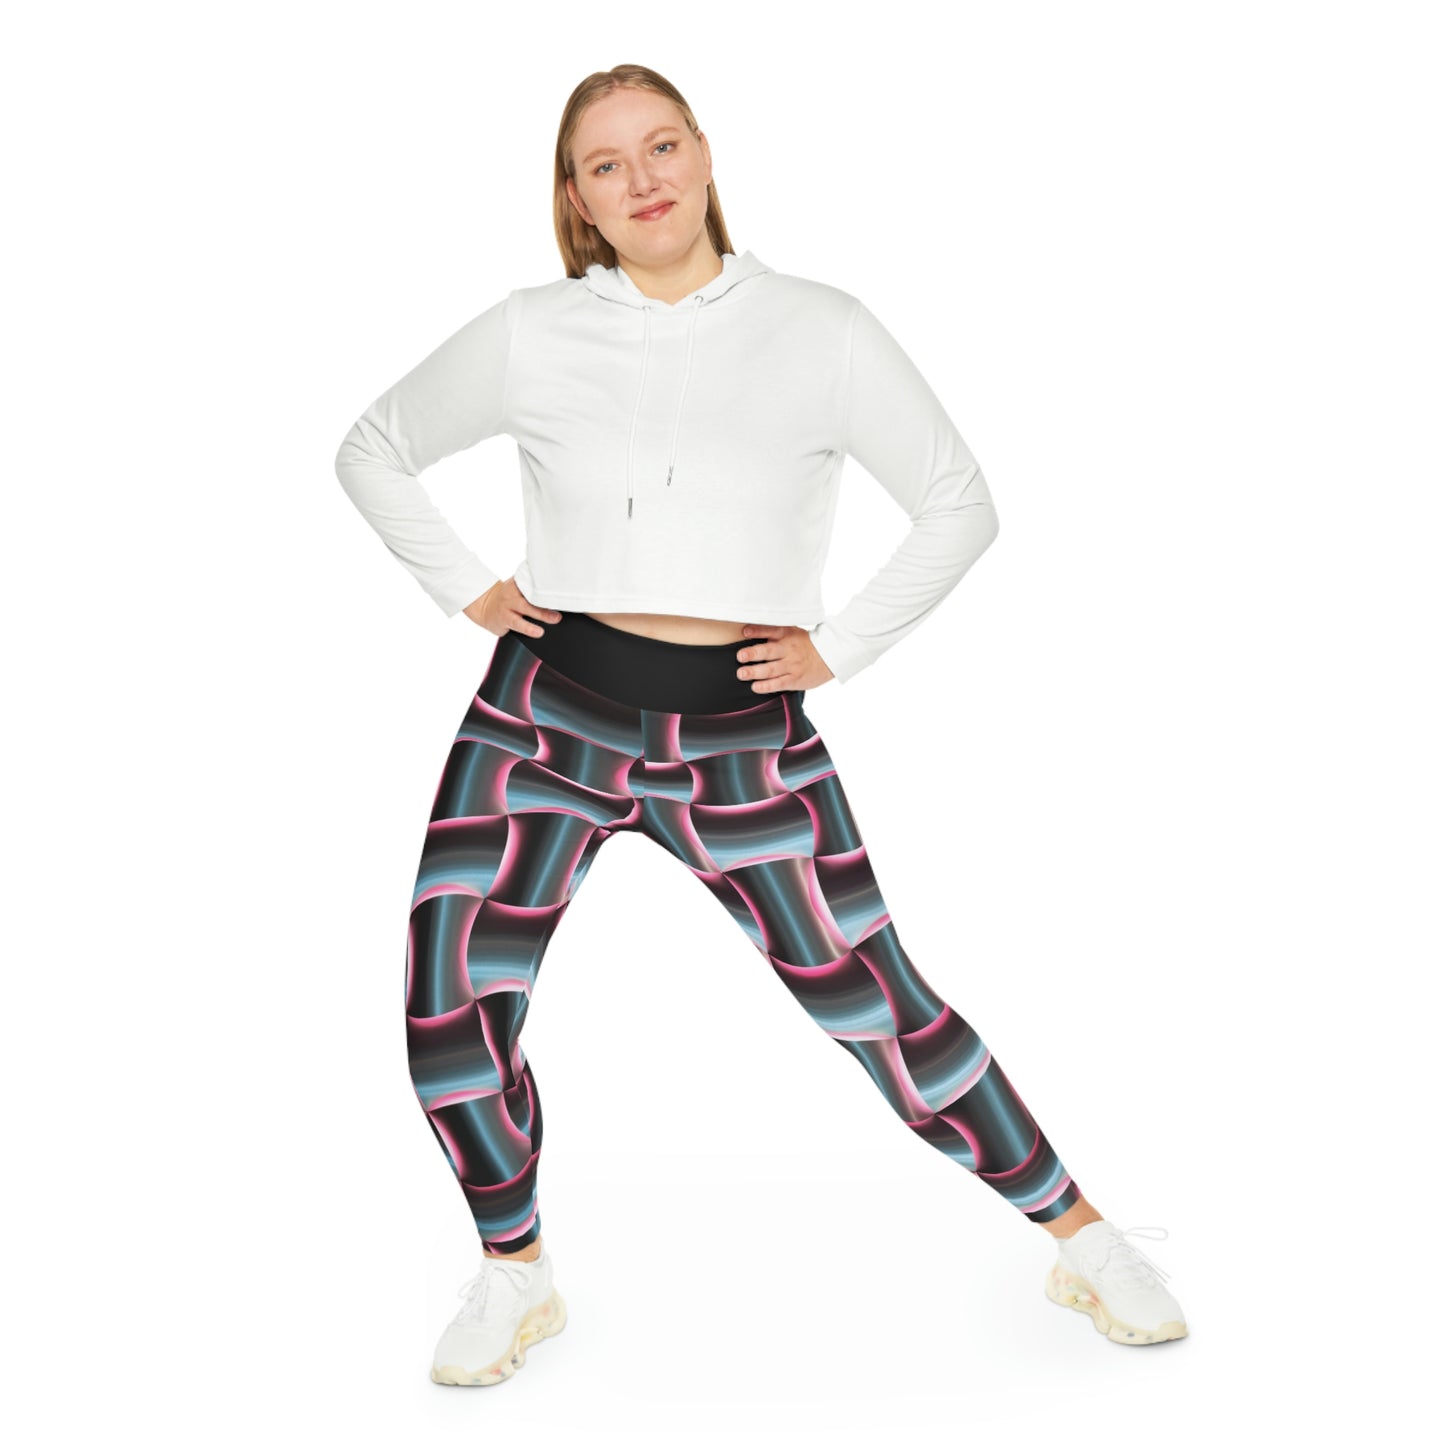 Robot Plus Size Leggings Plus Size Leggings One of a Kind Gift - Unique Workout Activewear tights for Mom fitness, Mothers Day, Girlfriend Christmas Gift